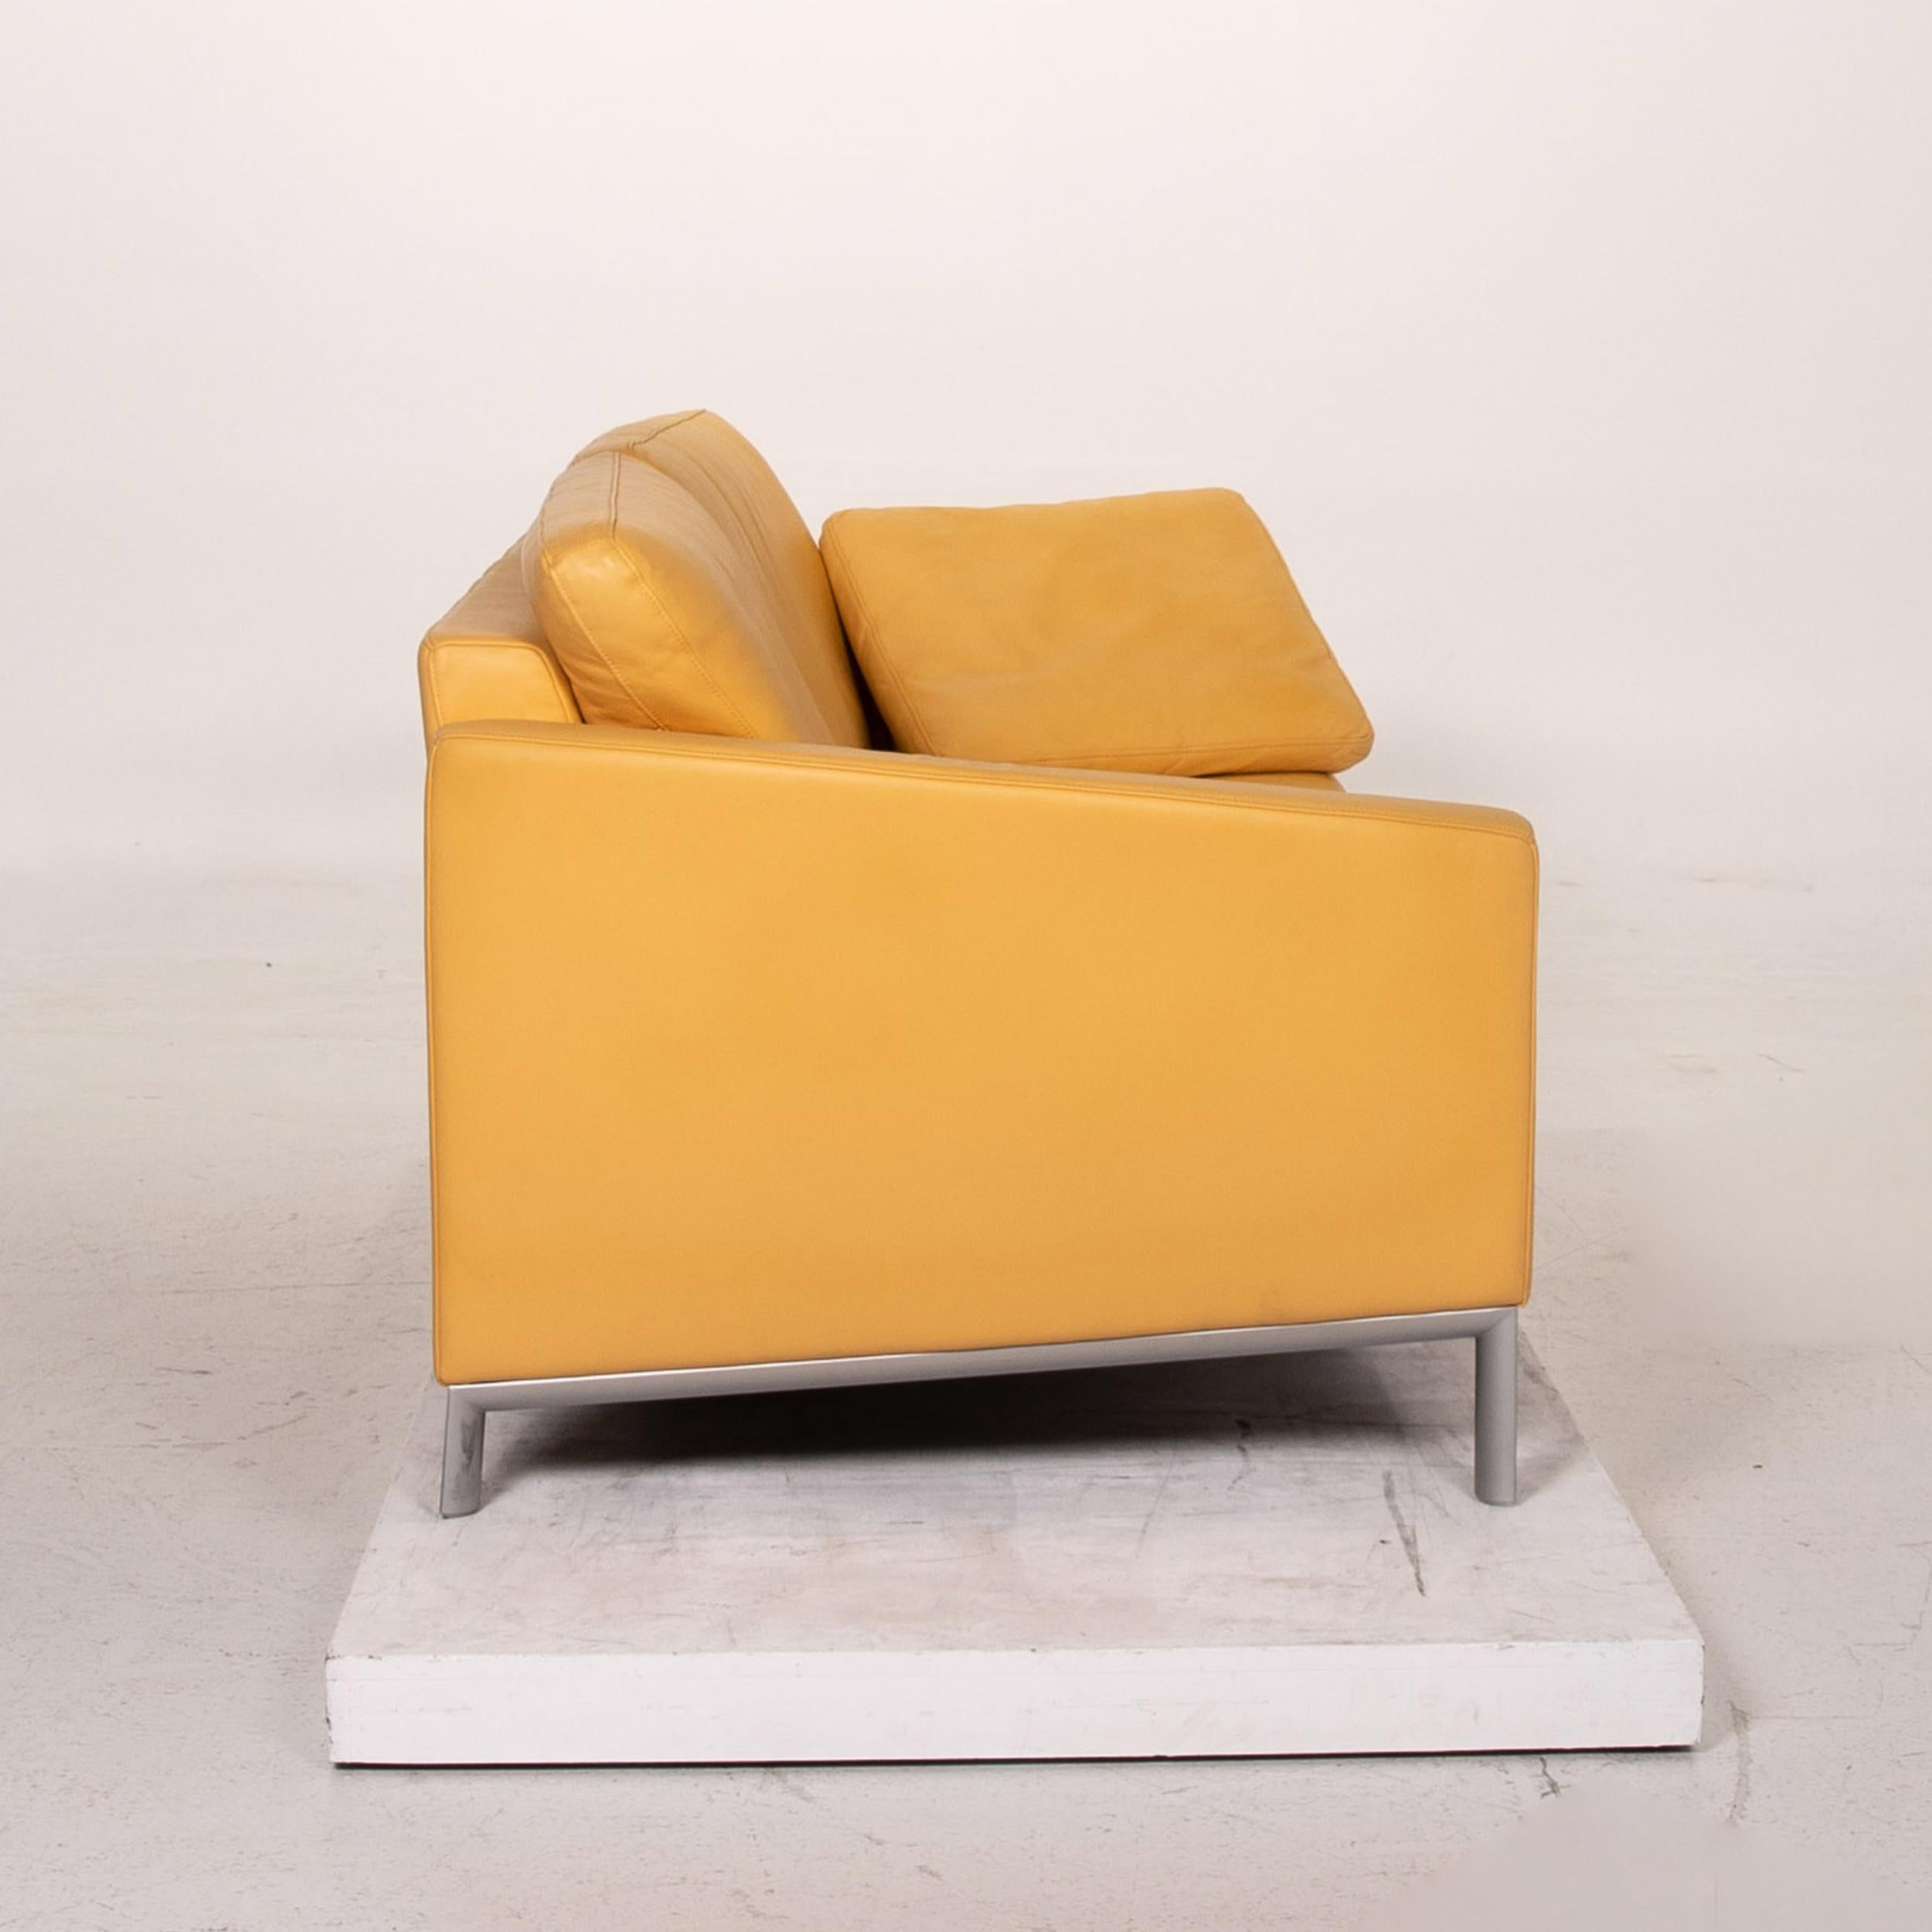 Rolf Benz Leather Sofa Yellow Three-Seat Couch For Sale 2